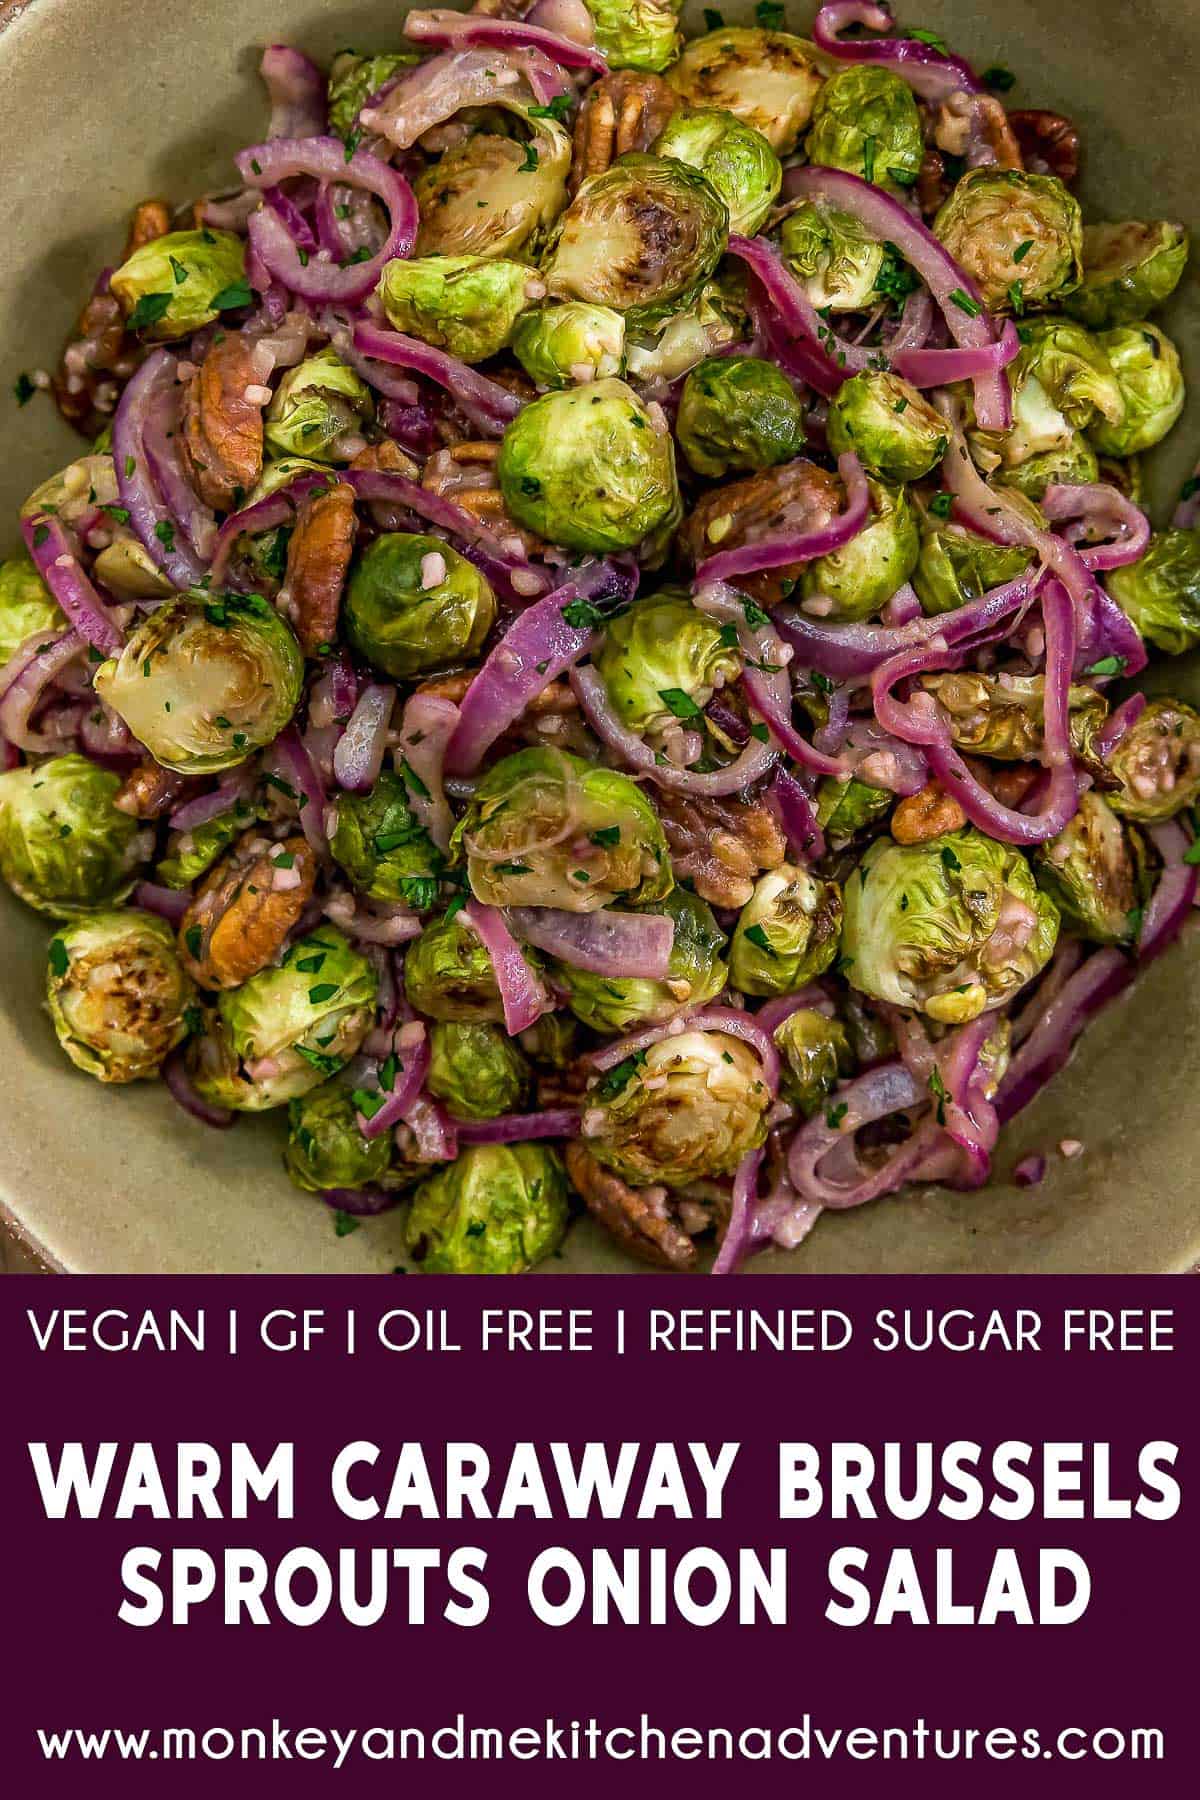 Warm Caraway Brussels Sprouts Onion Salad